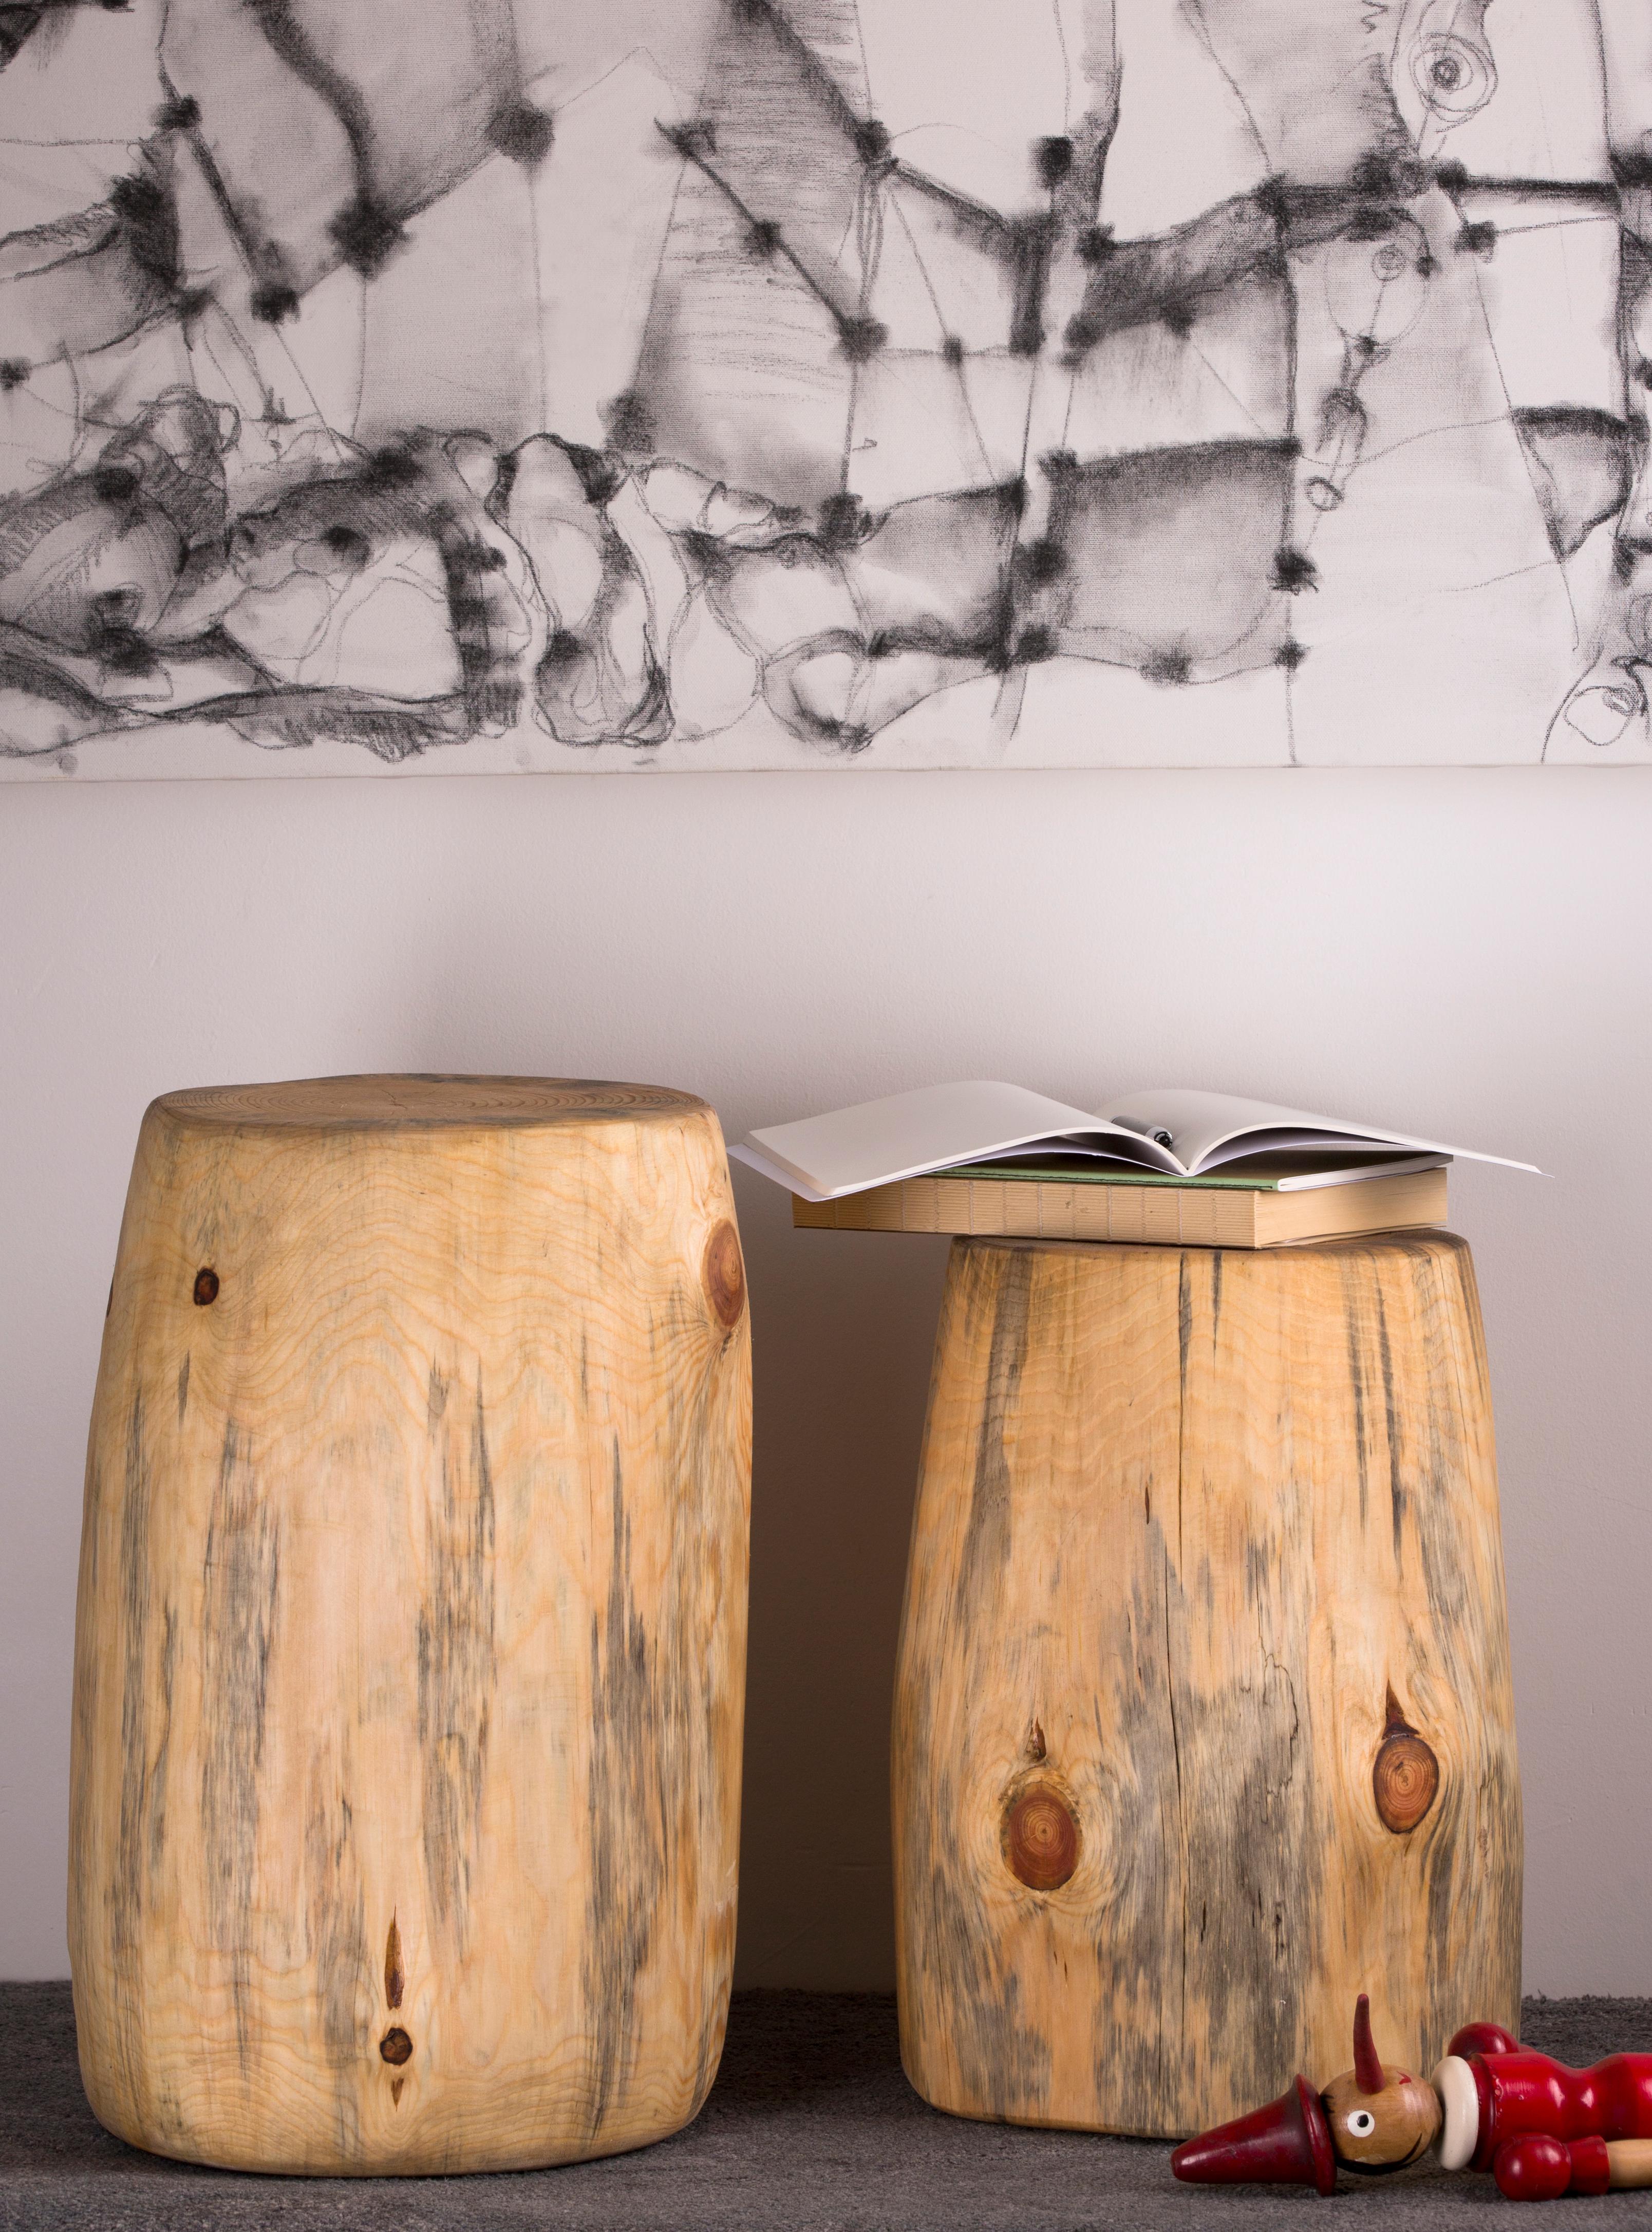 Set of 2 Kabuk coffee table by Rectangle Studio
Dimensions: 
W 27 x H 49 cm 
W 27 x H 38 cm 

Materials: Massive pinewood and natural wood oil

Kabuk is an alternative product with sculptural appearance which can be used as a coffee table and